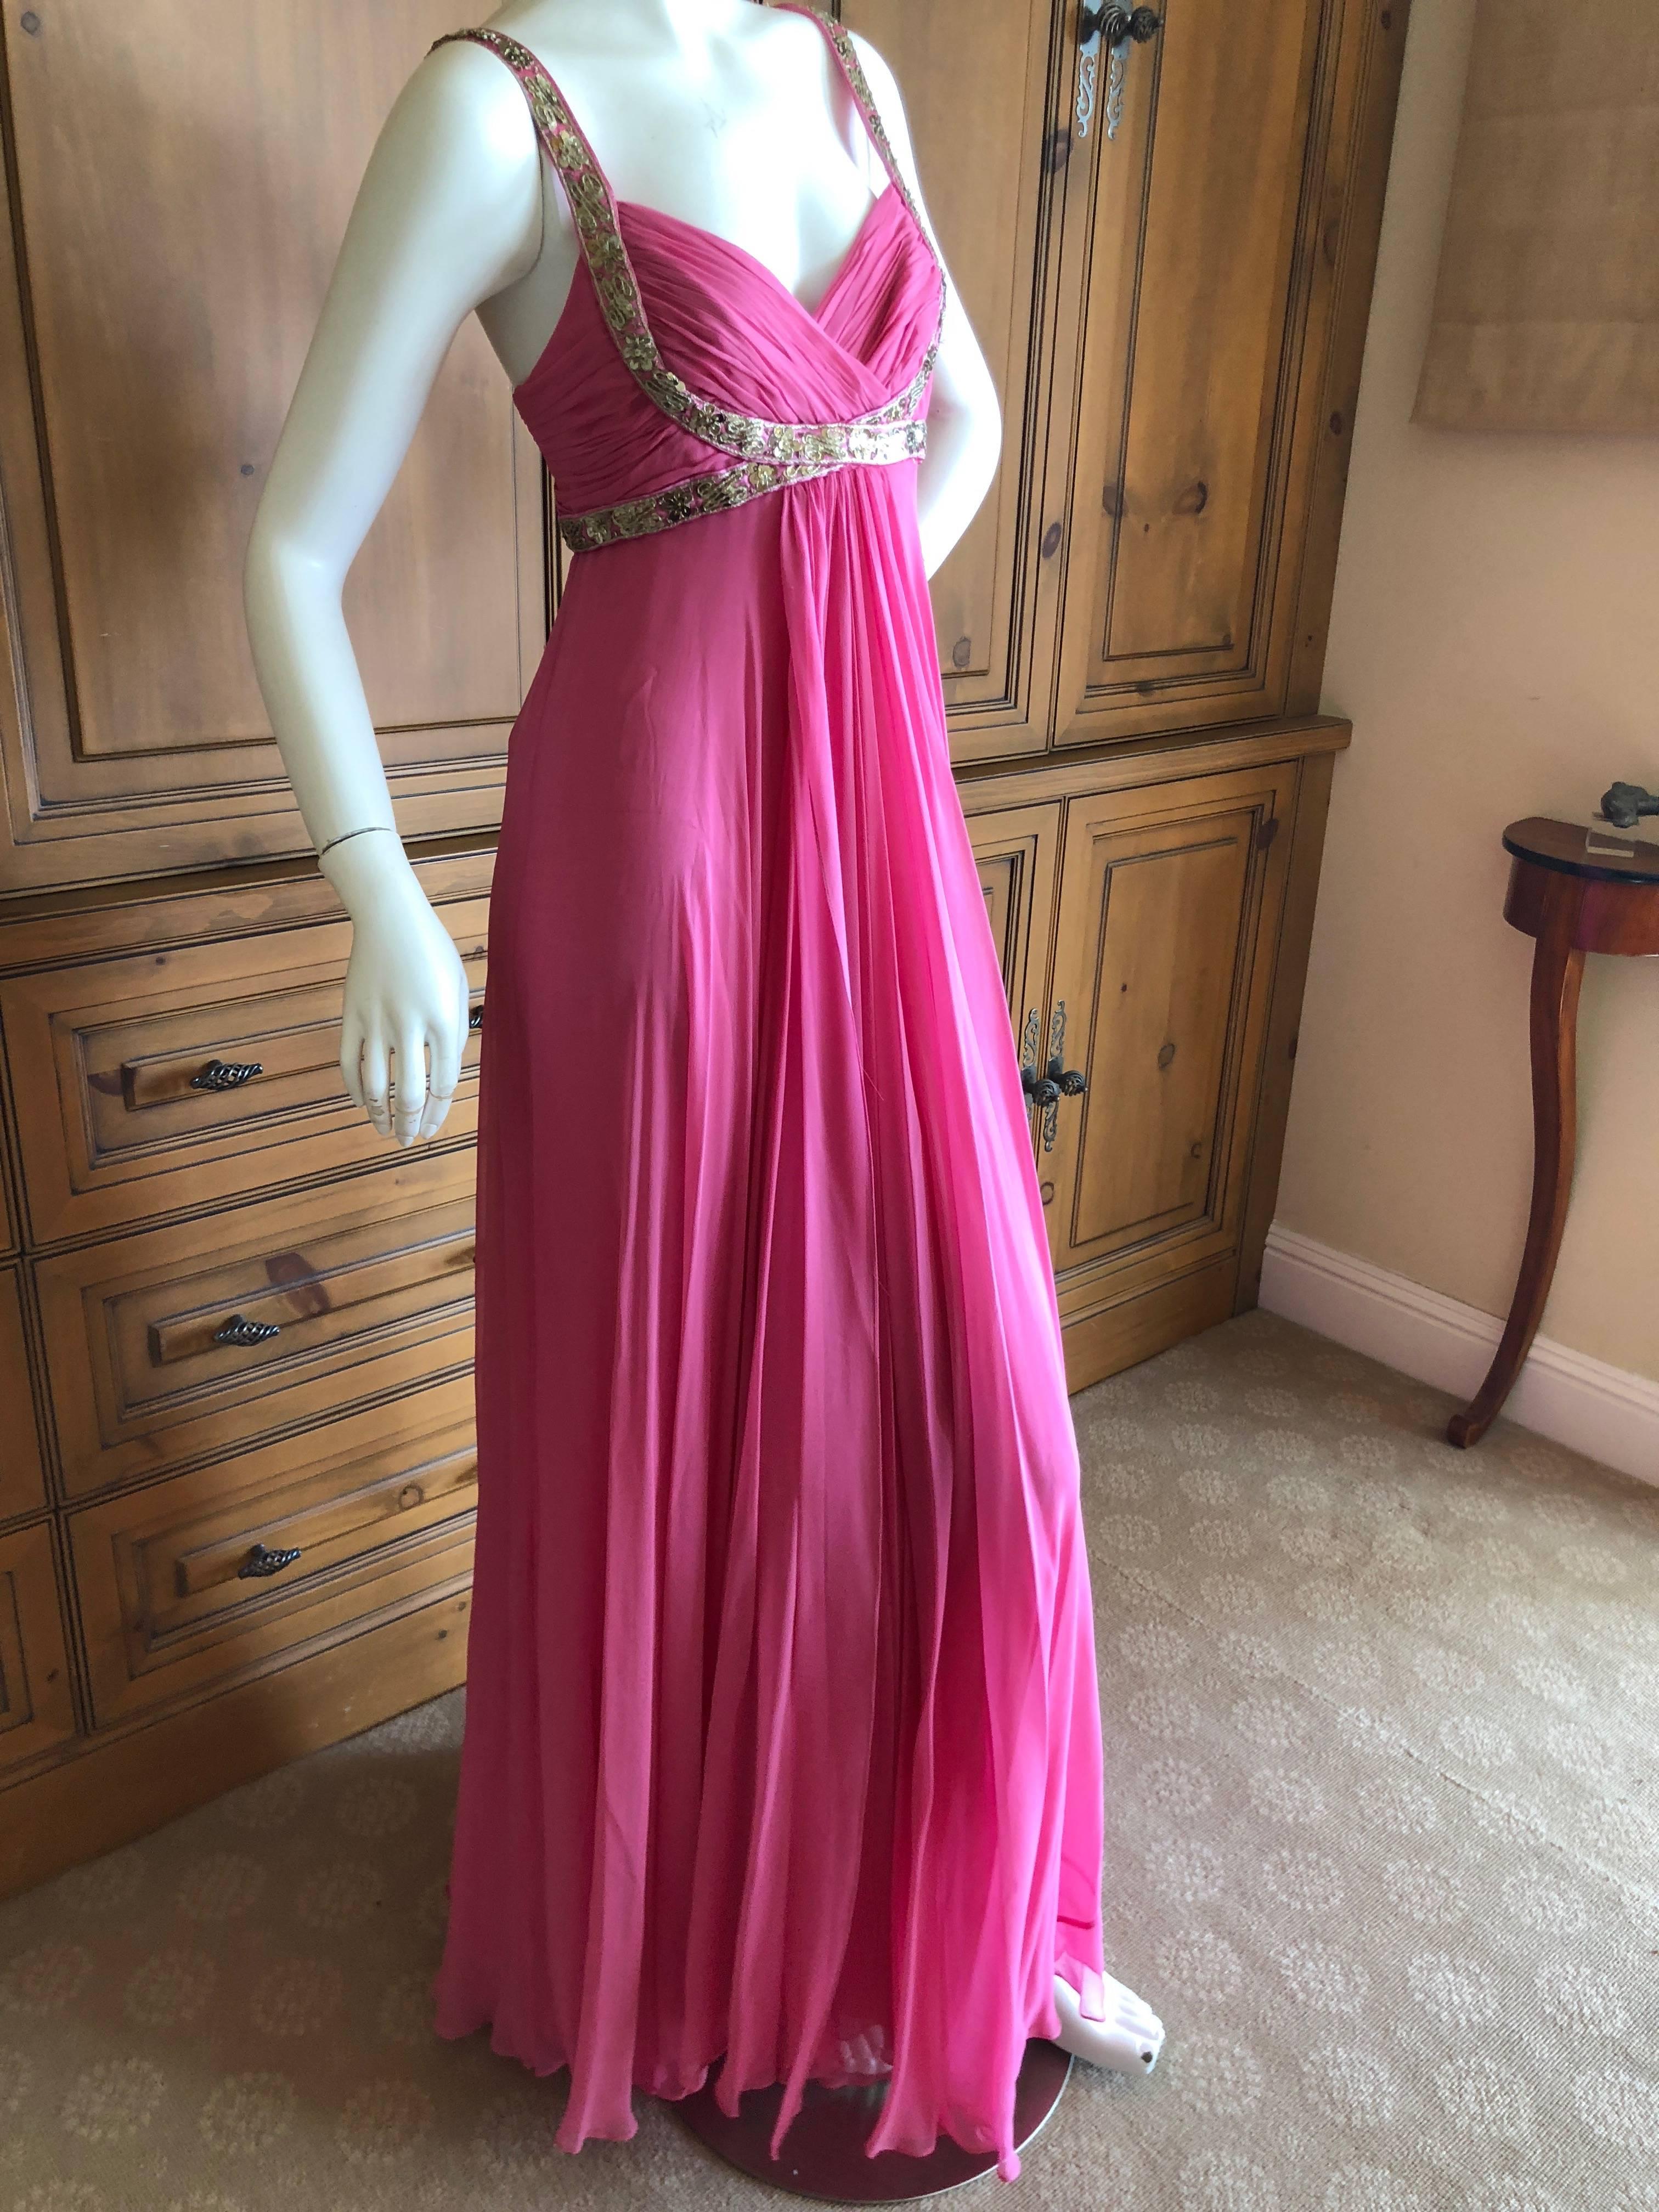 Marchesa Notte Silver Sequin Accented Pink Grecian Gown In Excellent Condition For Sale In Cloverdale, CA